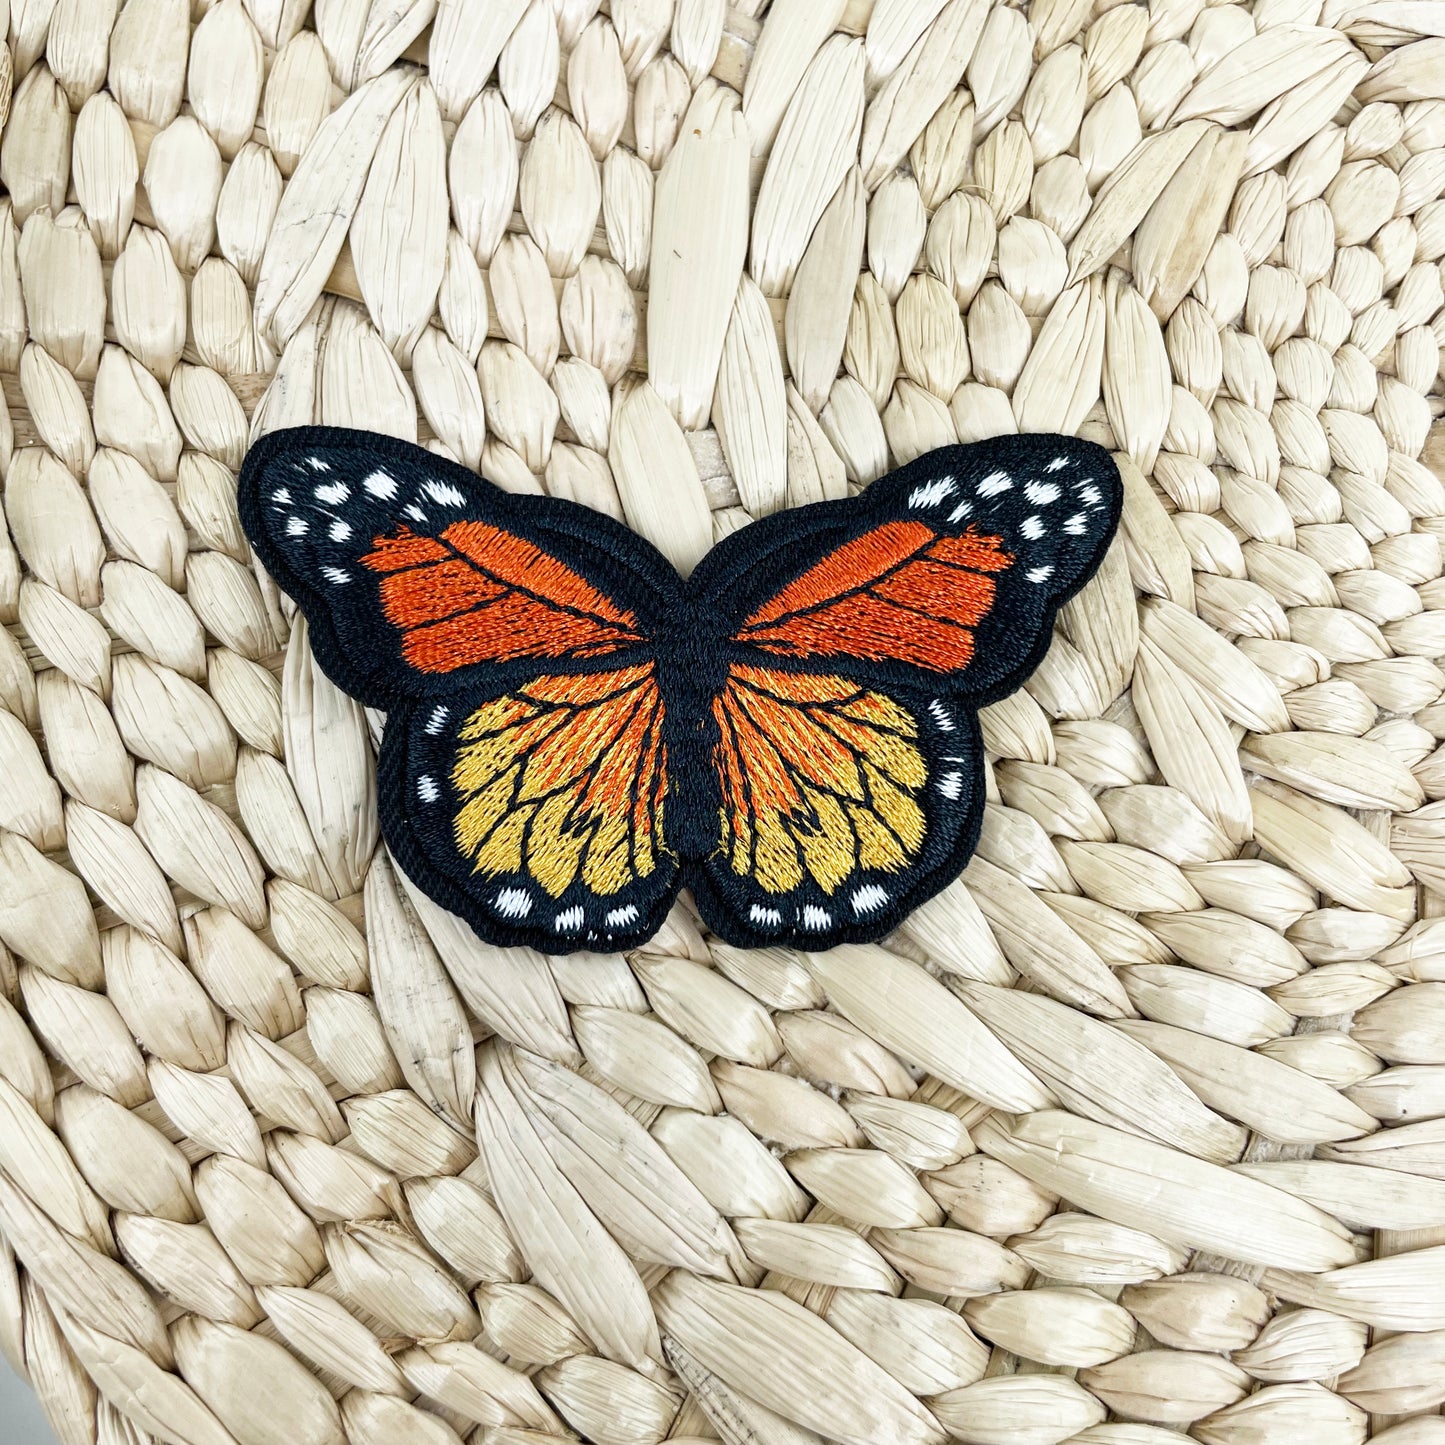 Iron-On Butterfly Patches - Multiple Sizes and Colors